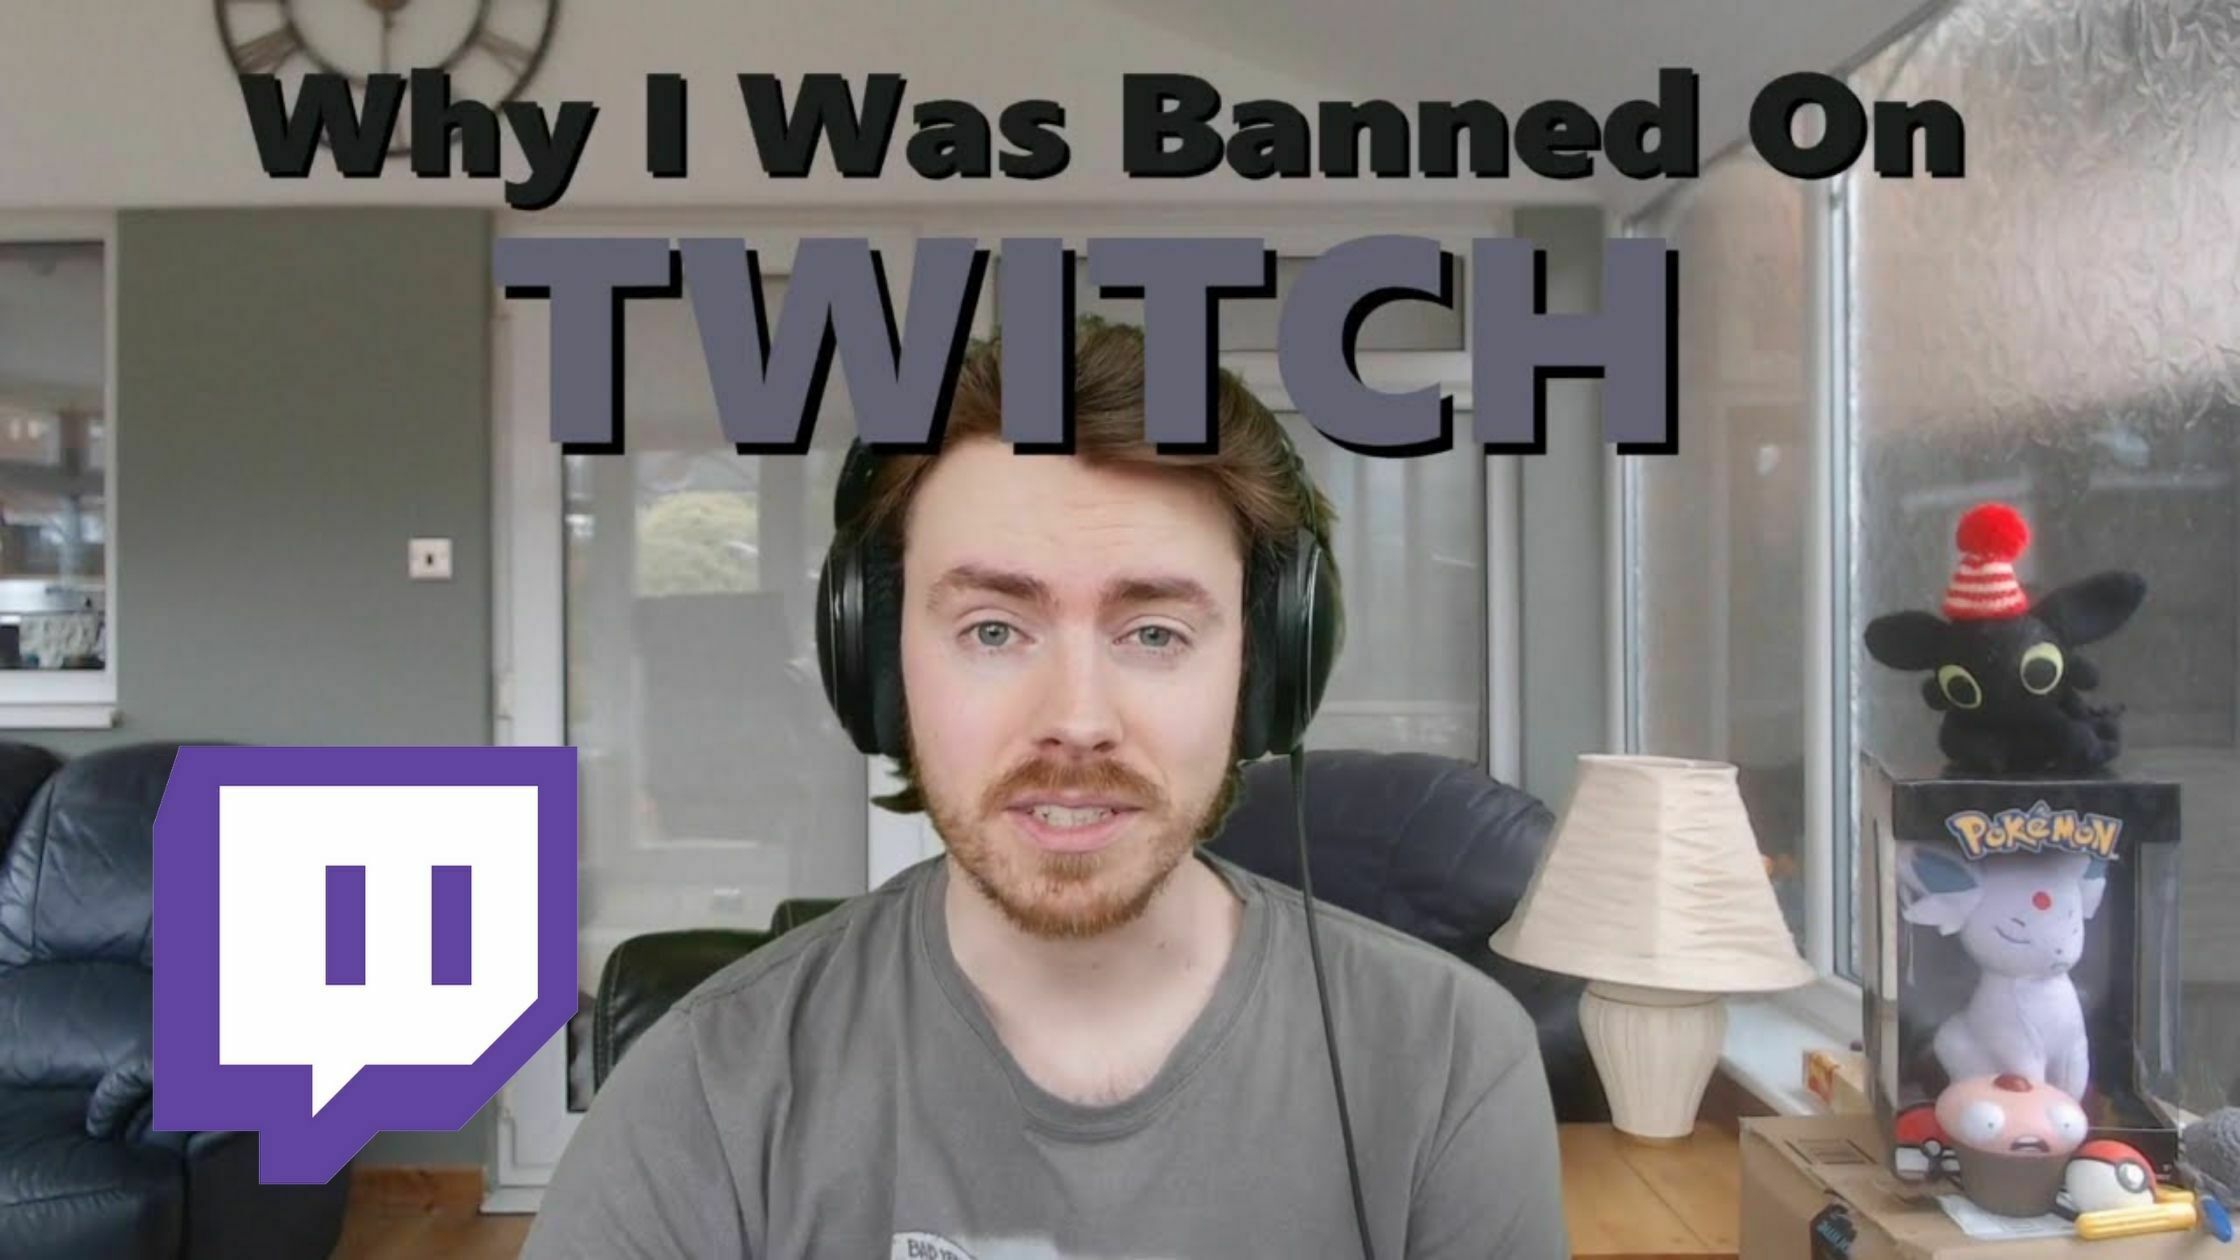 ryanwastaken-is-unbanned-on-twitch-after-2-years-of-wrongful-ban